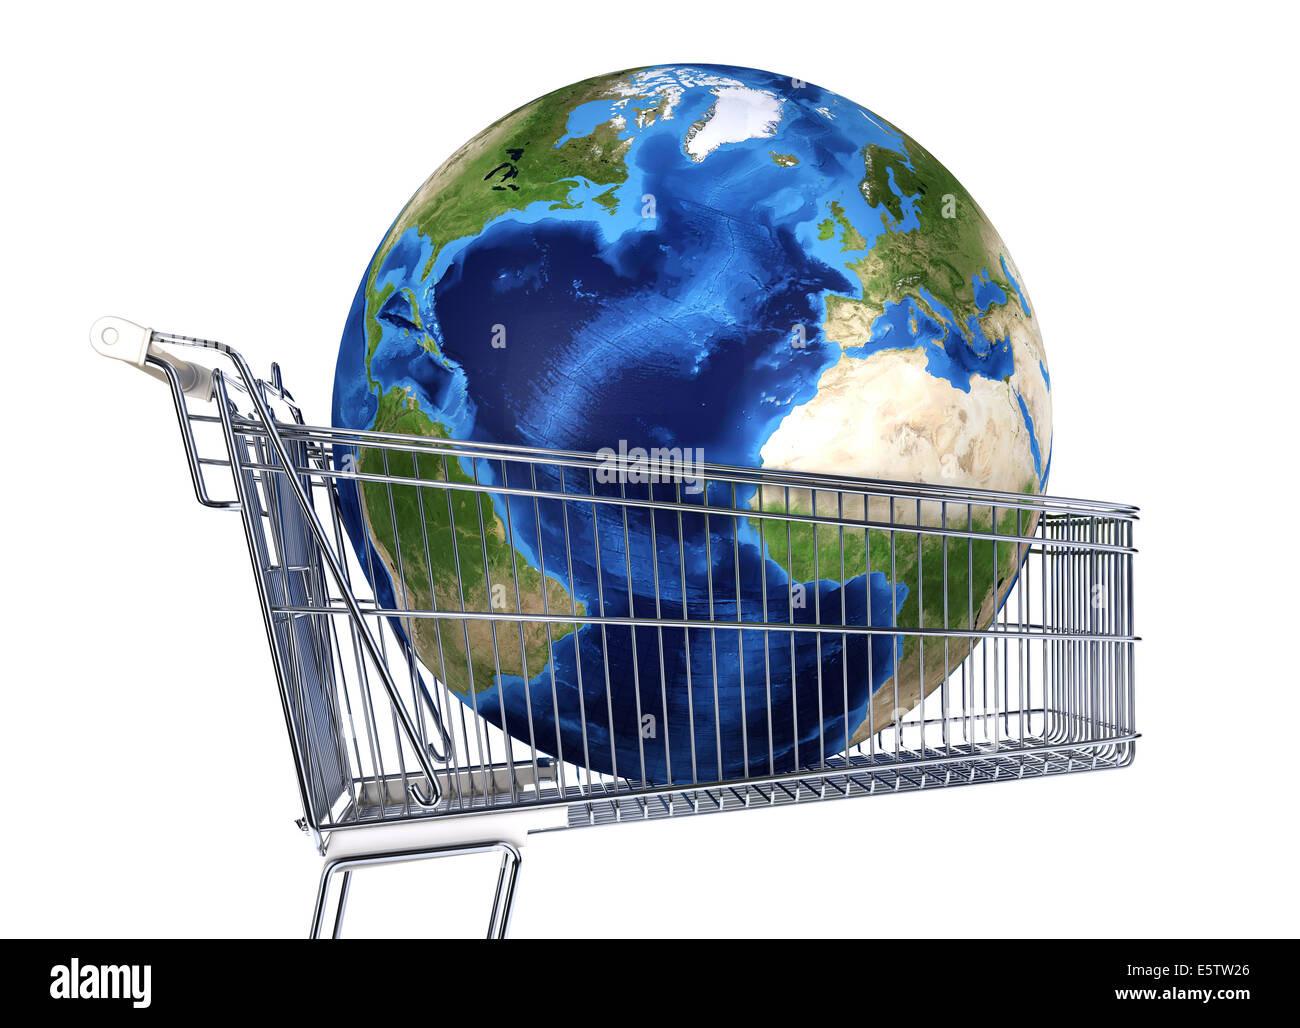 Planet Earth into supermarket trolley. Atlantic view. On white background. Clipping path included. Stock Photo